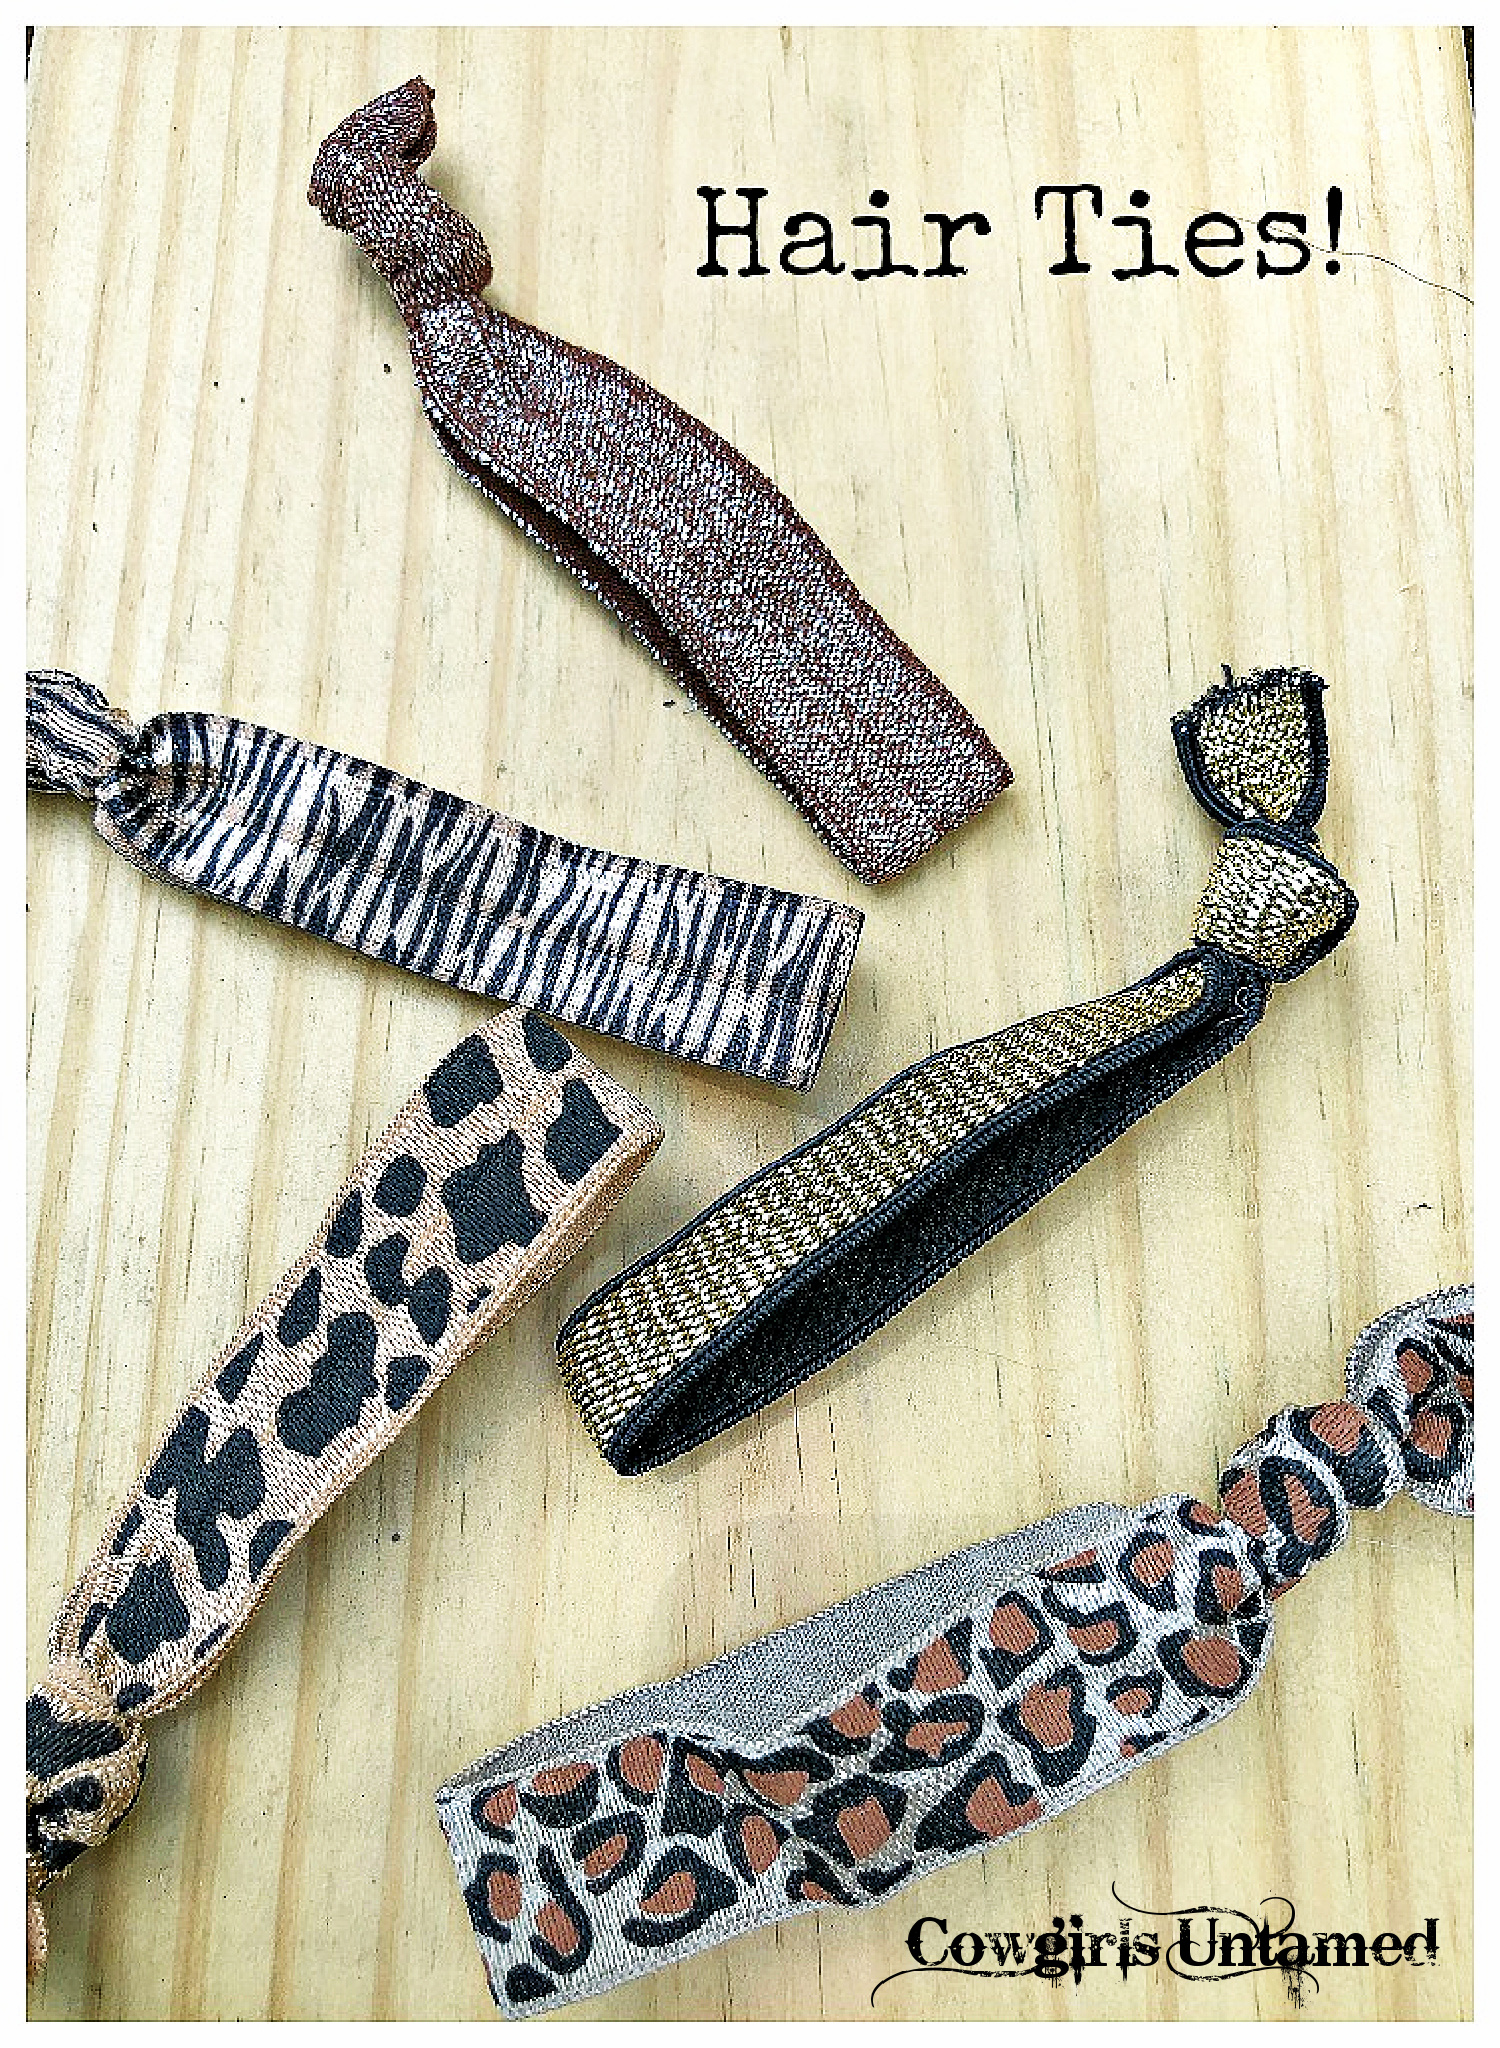 THE WILD LIFE HAIR TIES Set of 5 Animal Print & Sparkly Stretchy Hair Ties ONLY 2 LEFT!